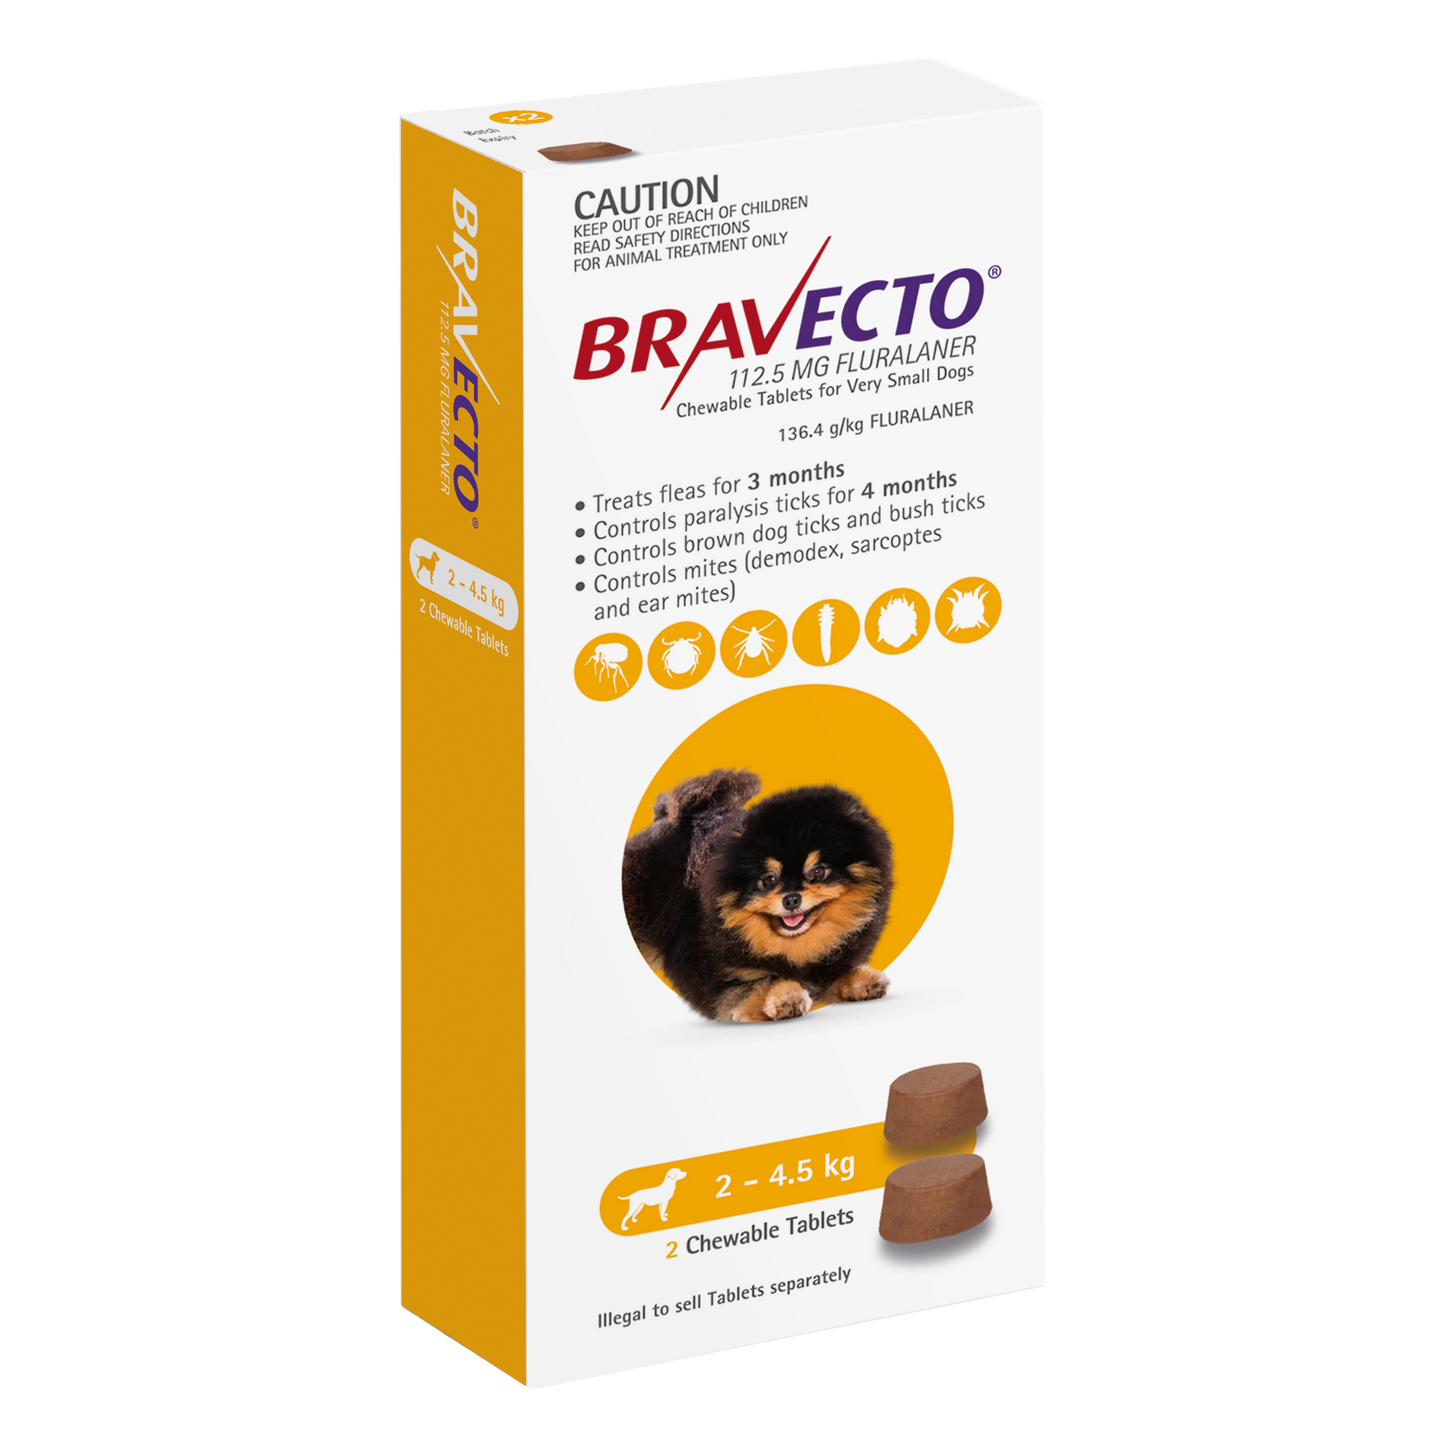 Bravecto Chewables For Dogs 4.4-9.9lbs (2-4.5kg)